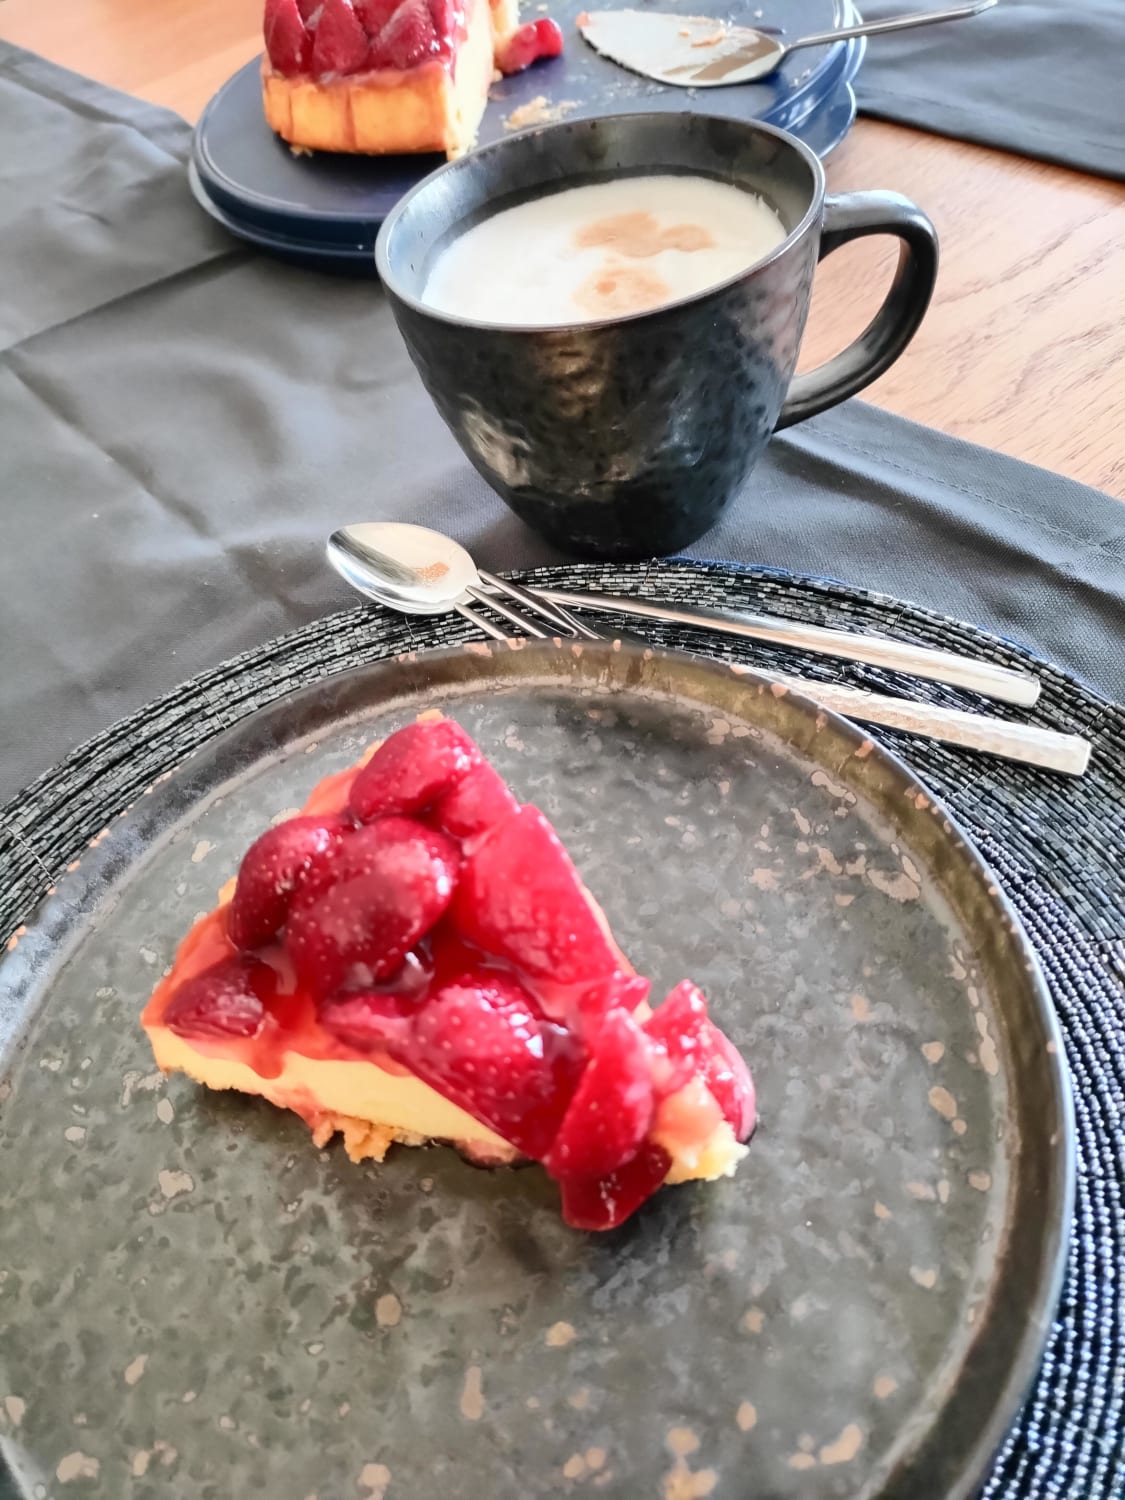 Strawberry cake with lemon curd and homemade jelly